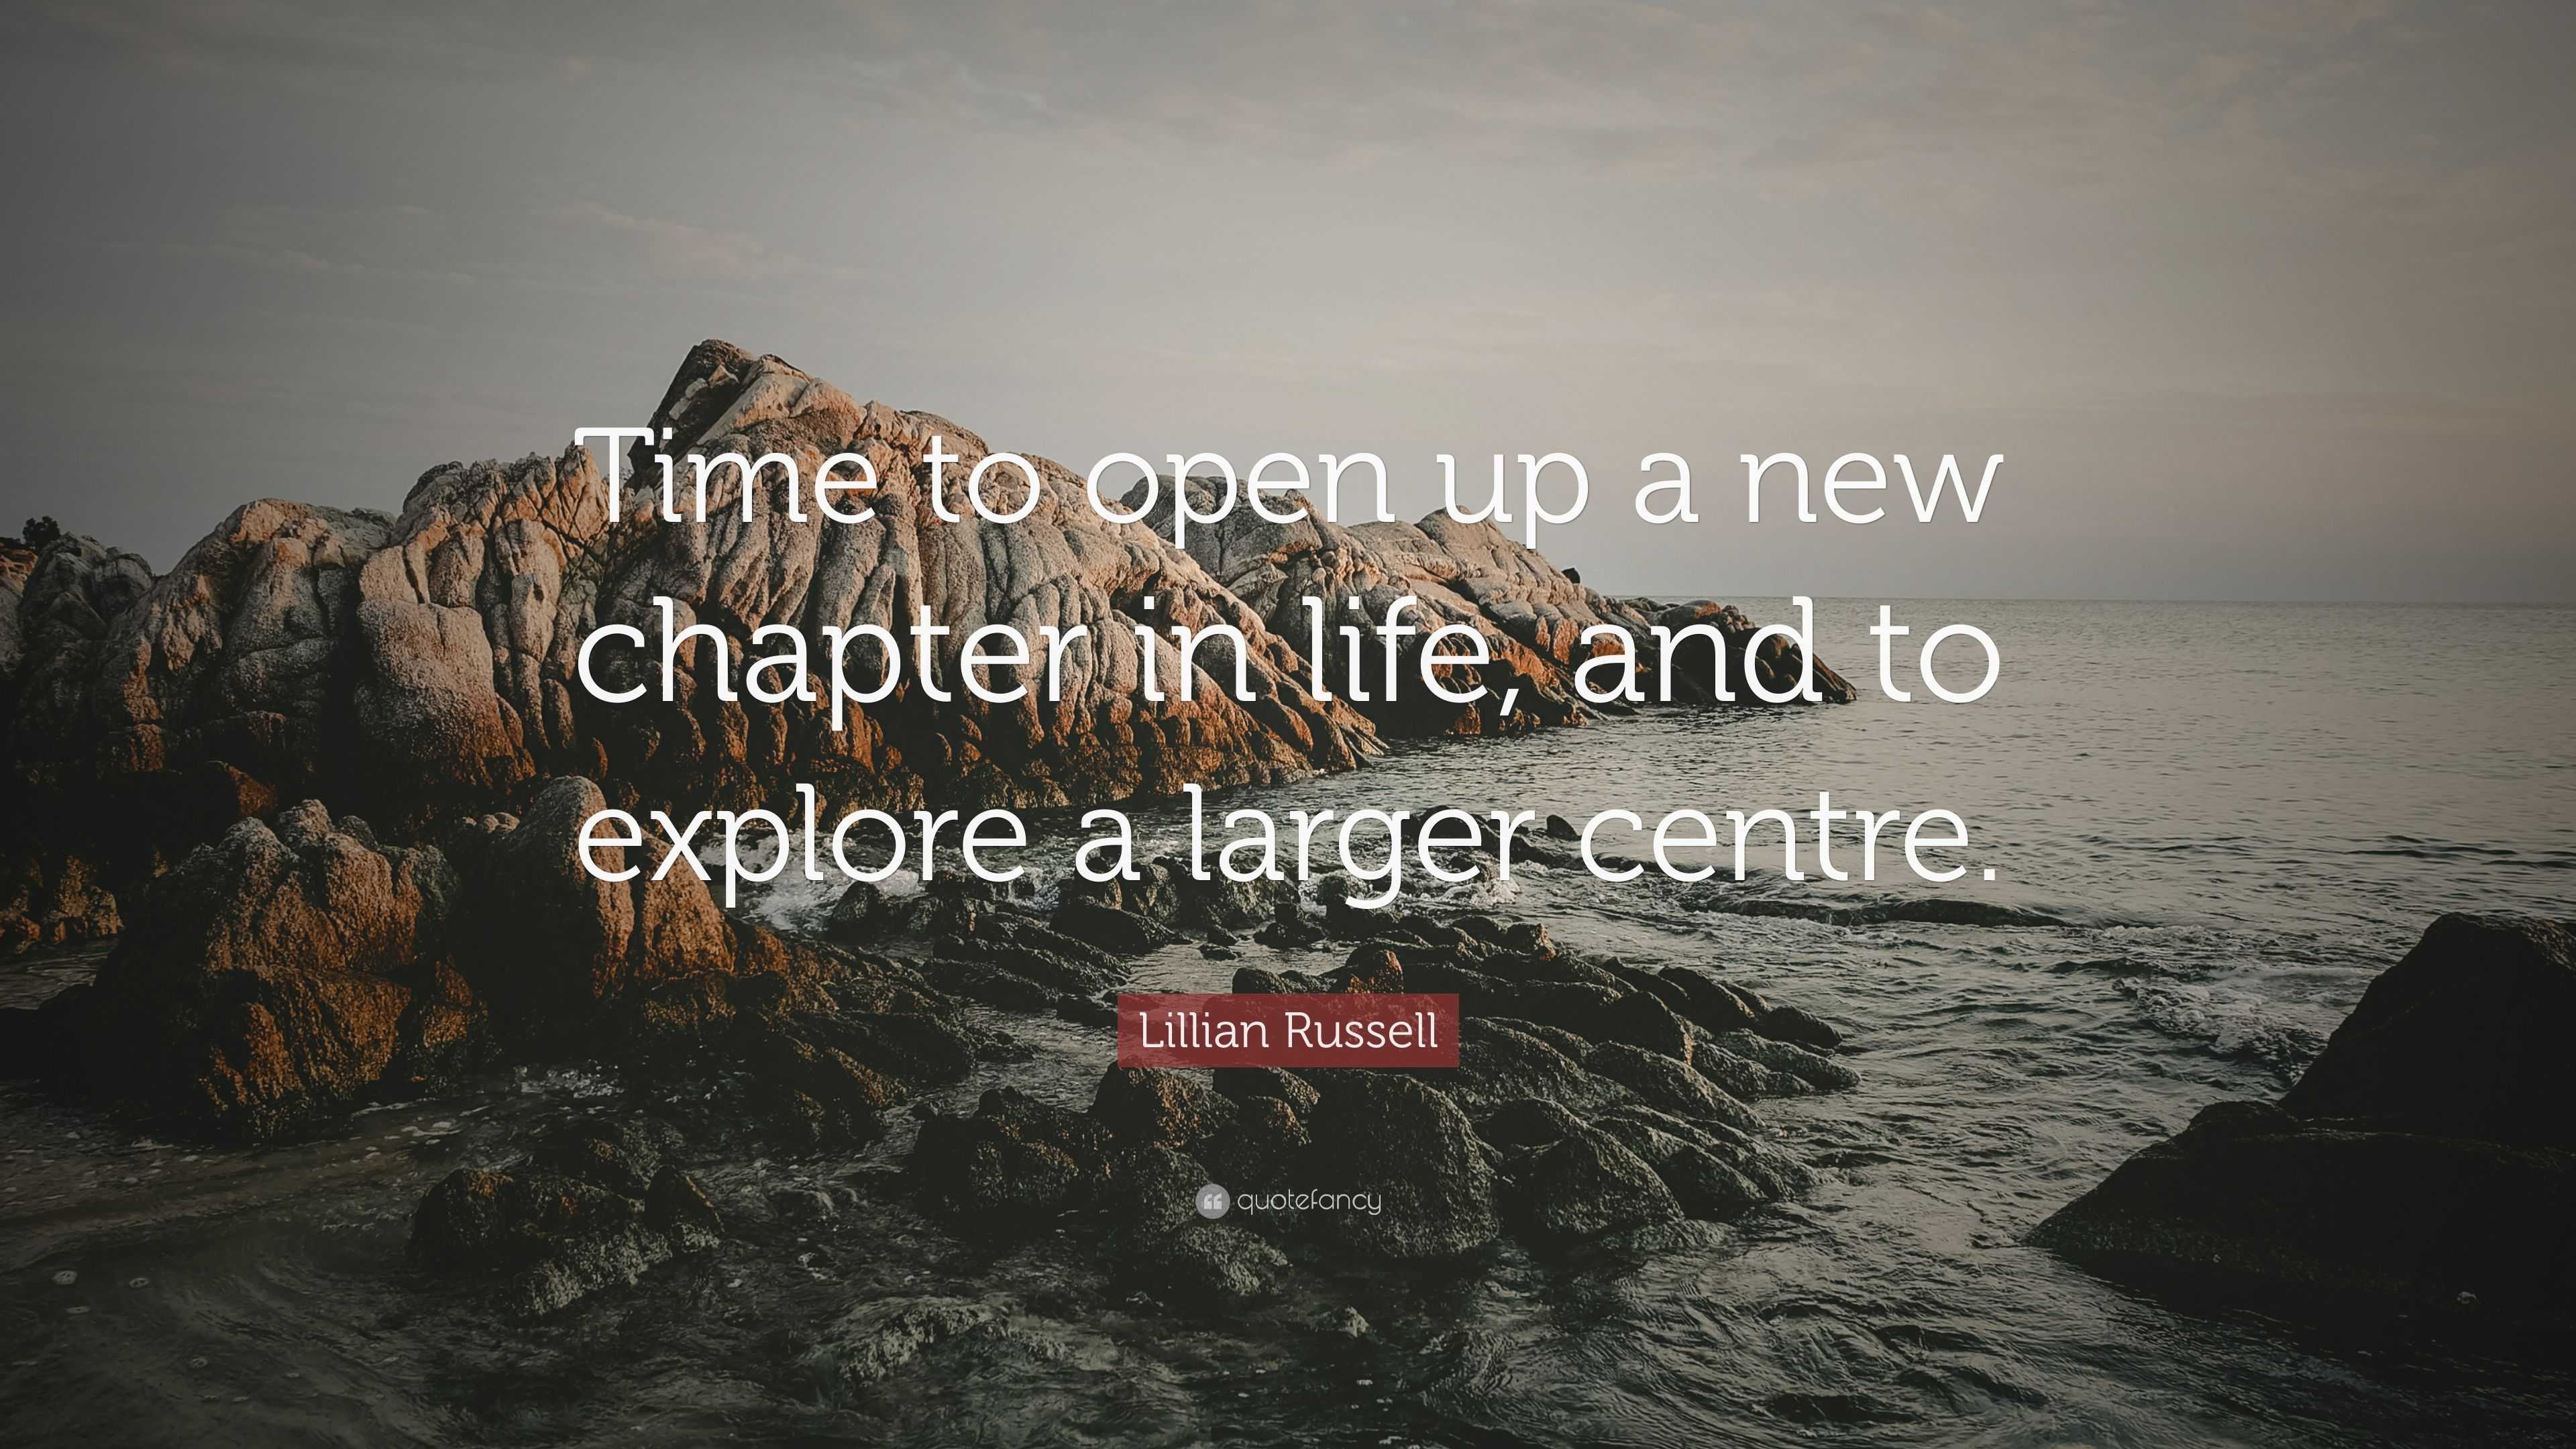 Lillian Russell Quote “Time to open up a new chapter in life and